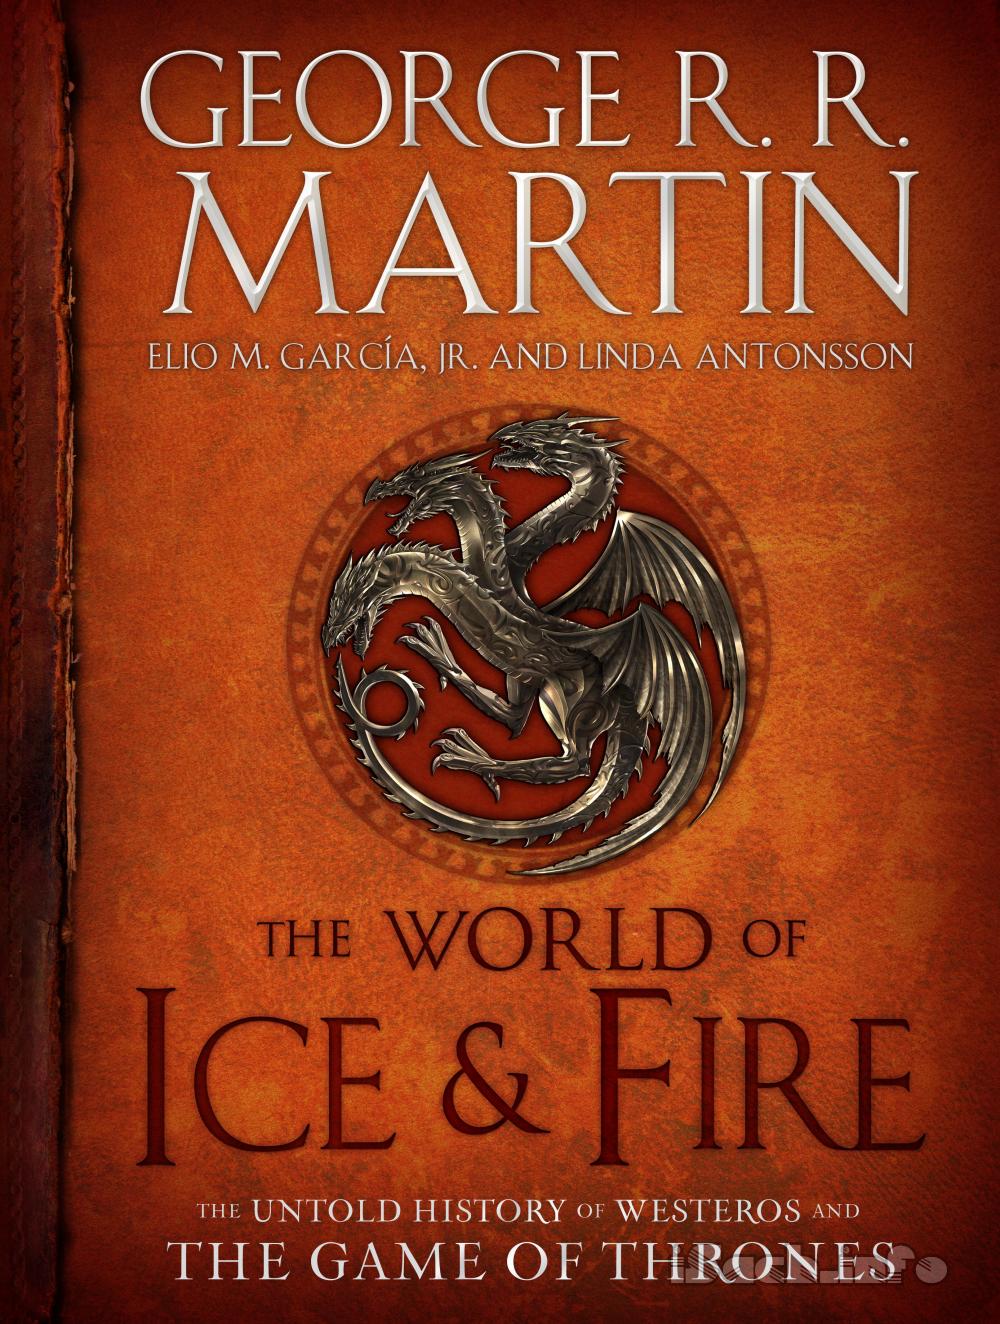 A Song of Ice and Fire audiobook: A series by George R.R. Martin